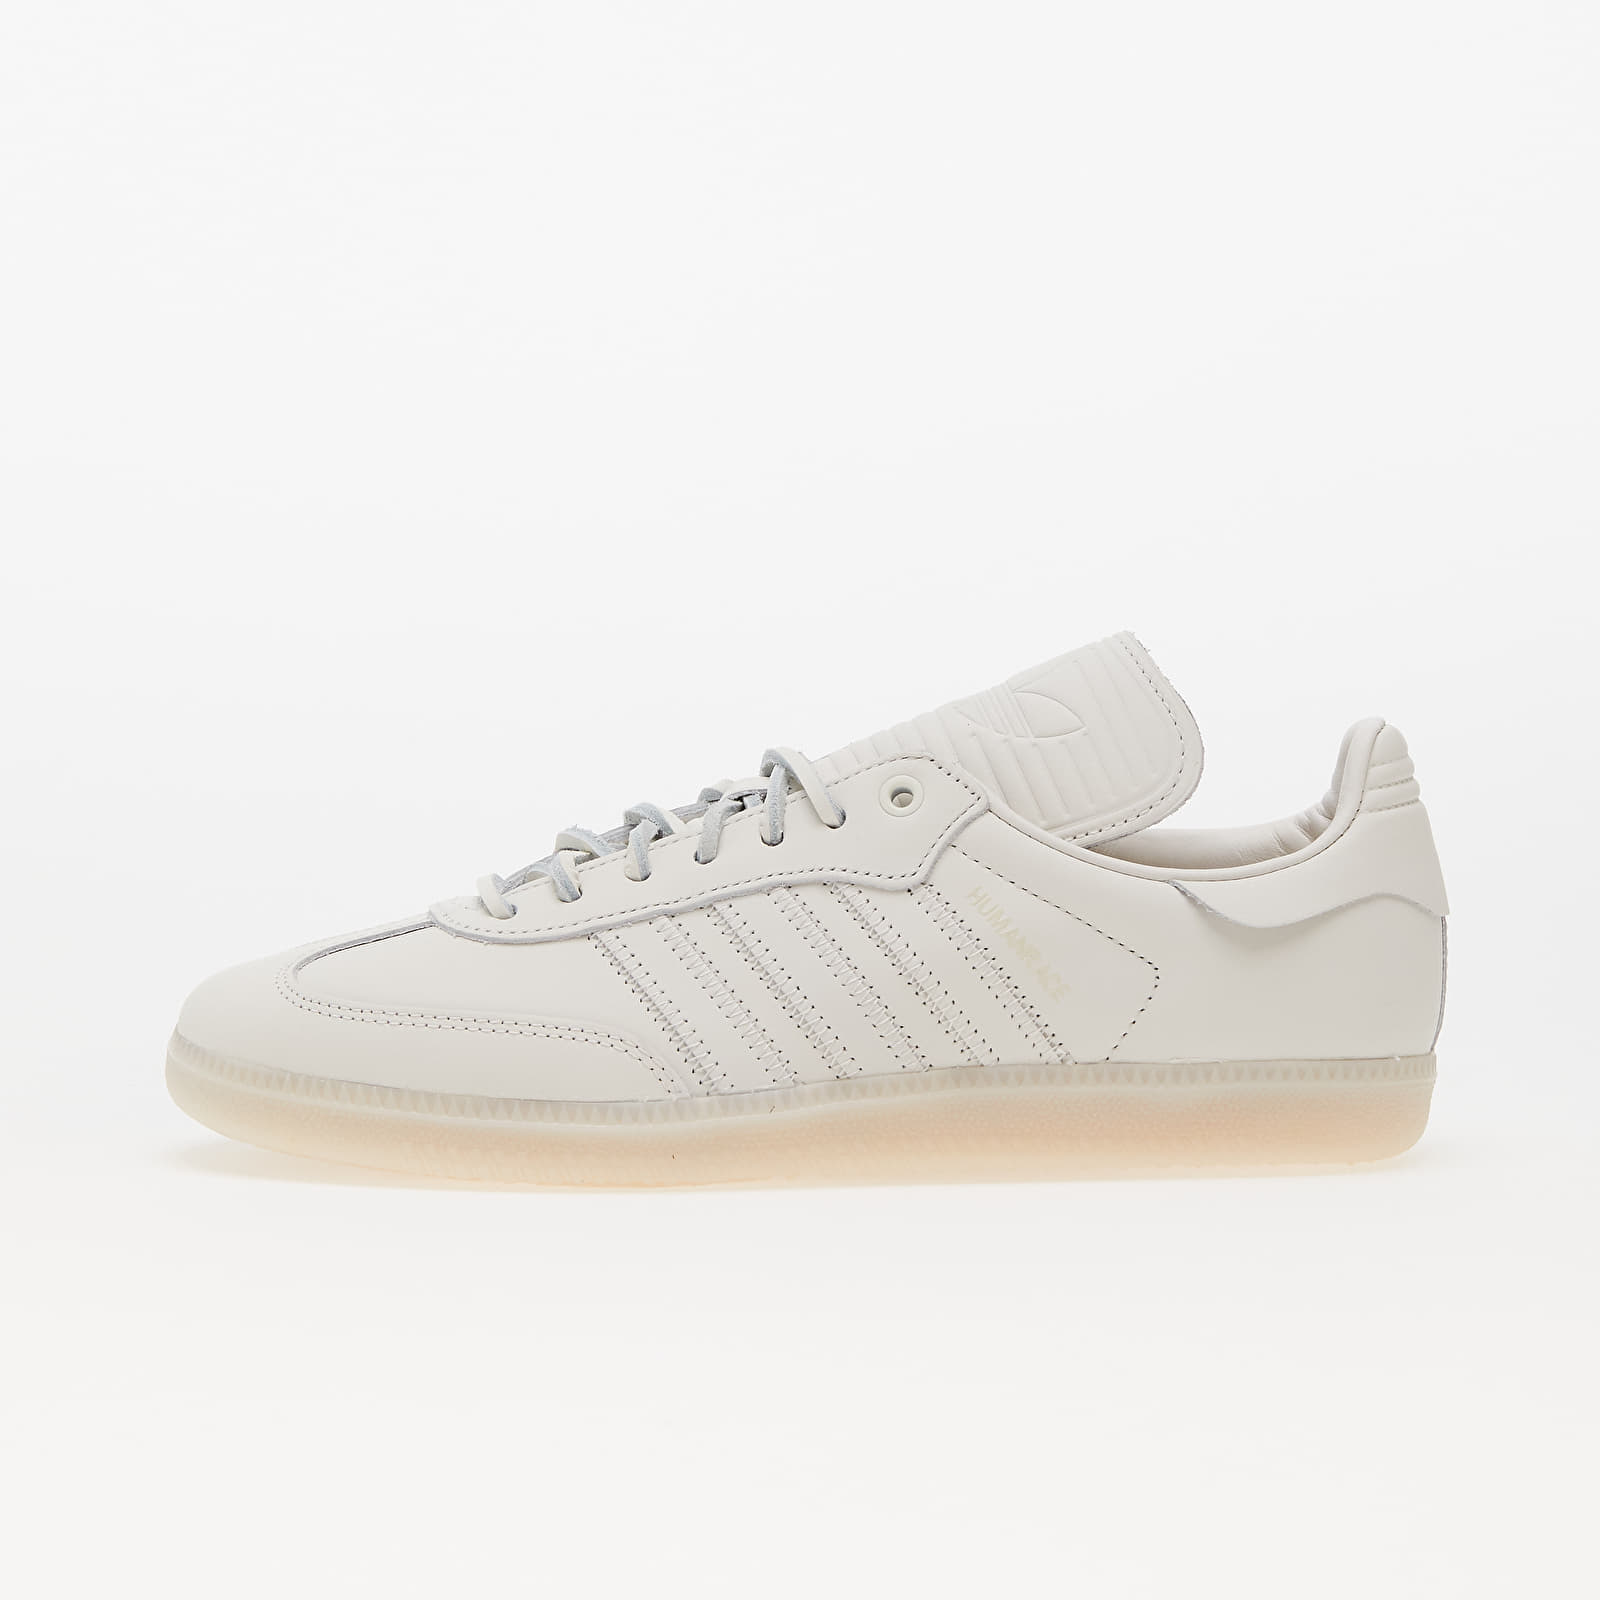 Chaussures et baskets homme adidas Humanrace Samba Cloud White/ Cloud White/ Cloud White